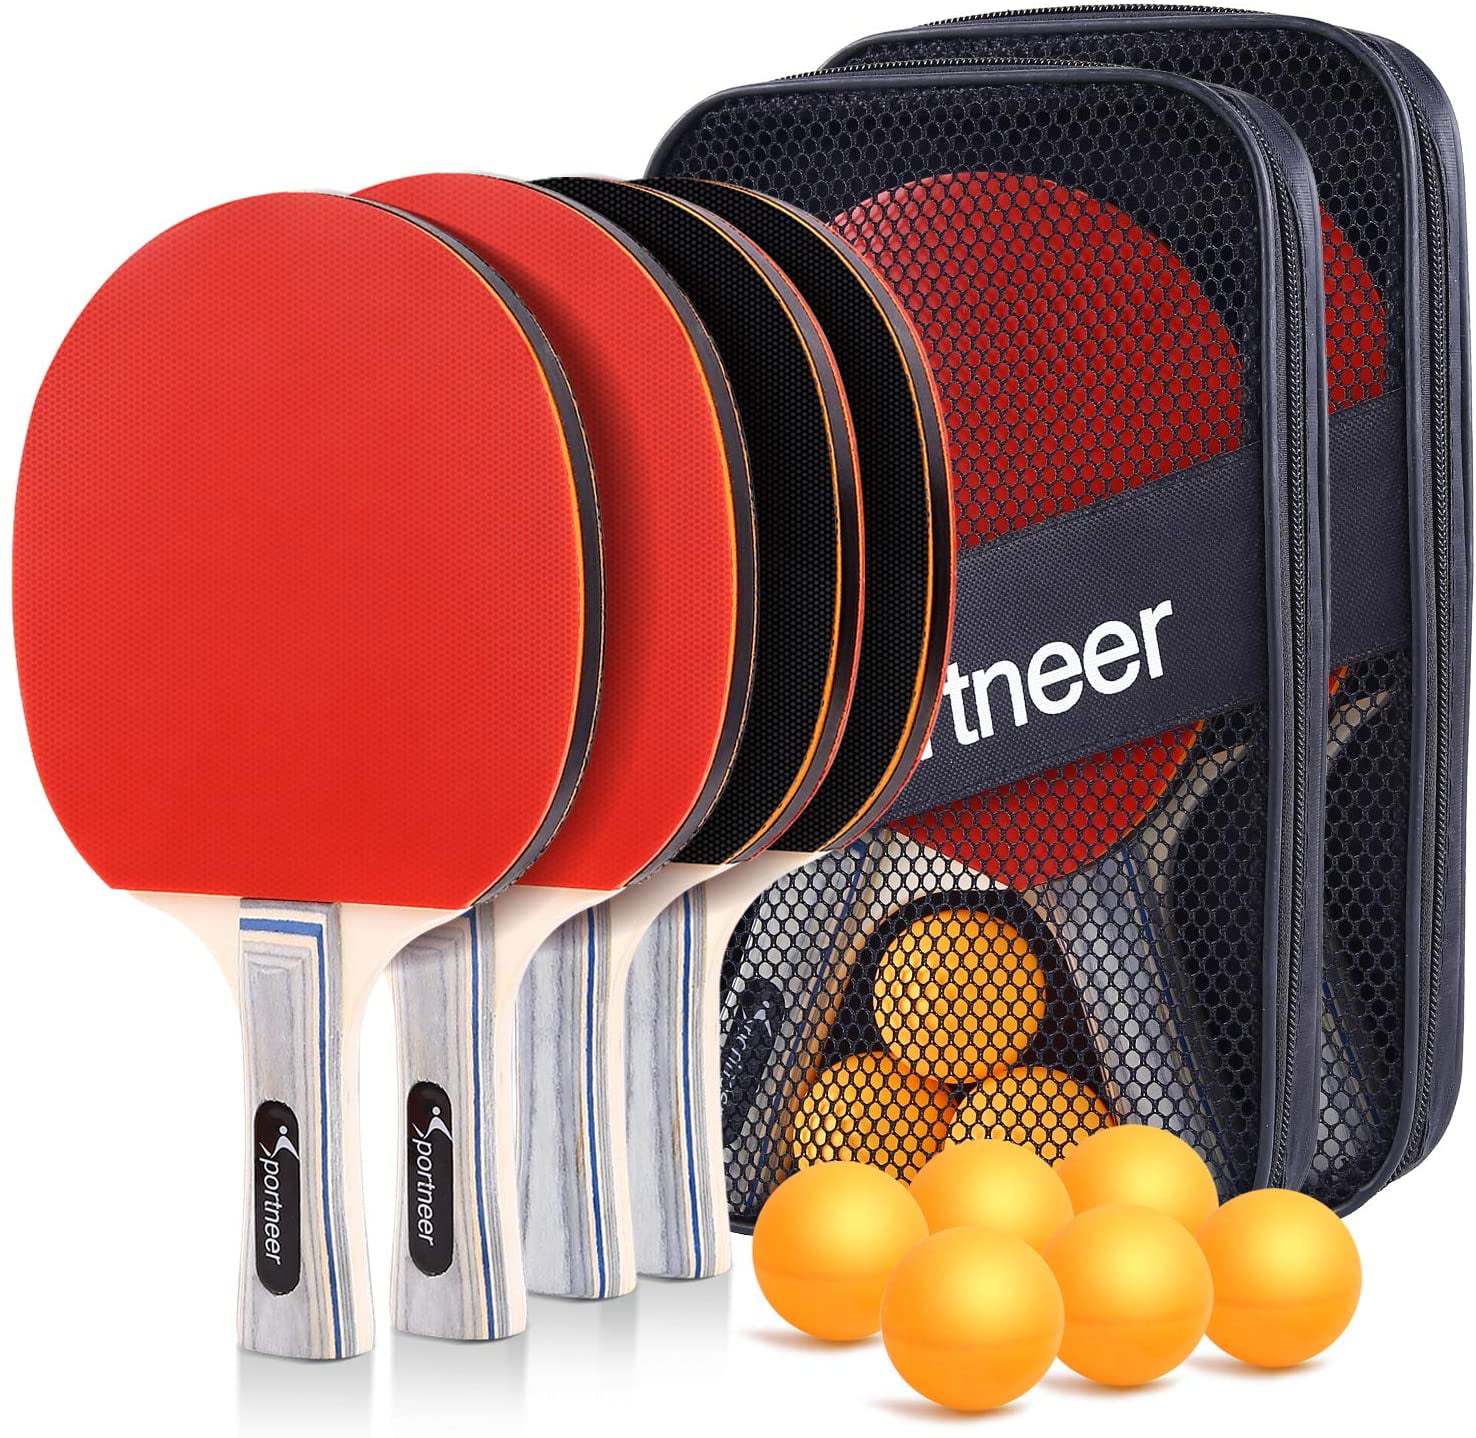 Portable Table Tennis Racket Ping Pong Paddle Bat Pouch Case Cover Container New 